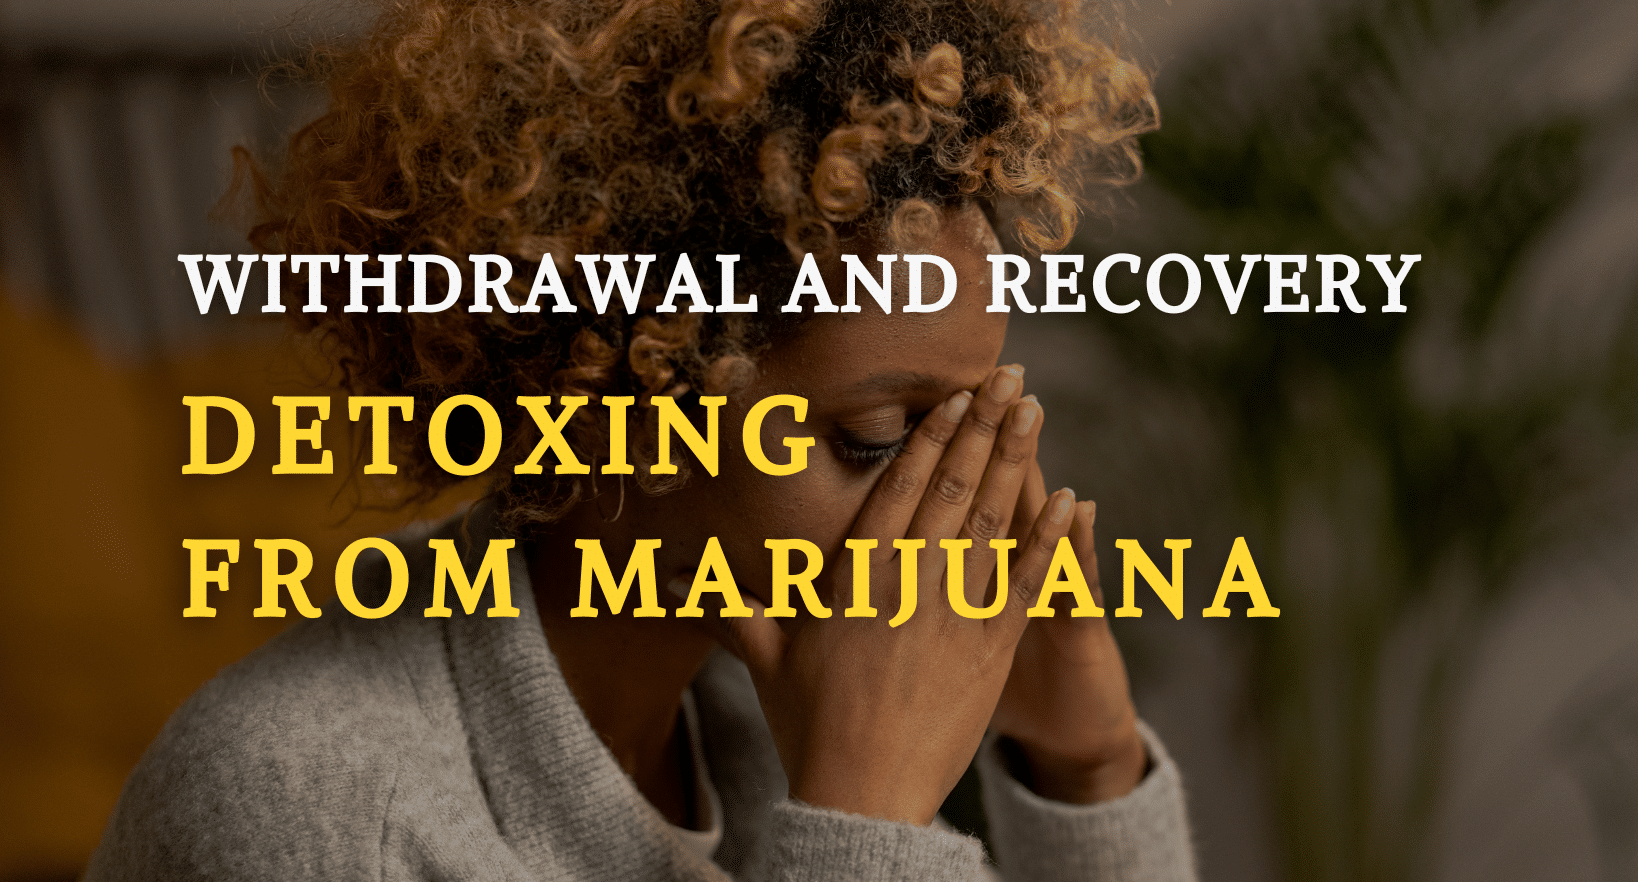 Detoxing from Marijuana: Withdrawal and Recovery